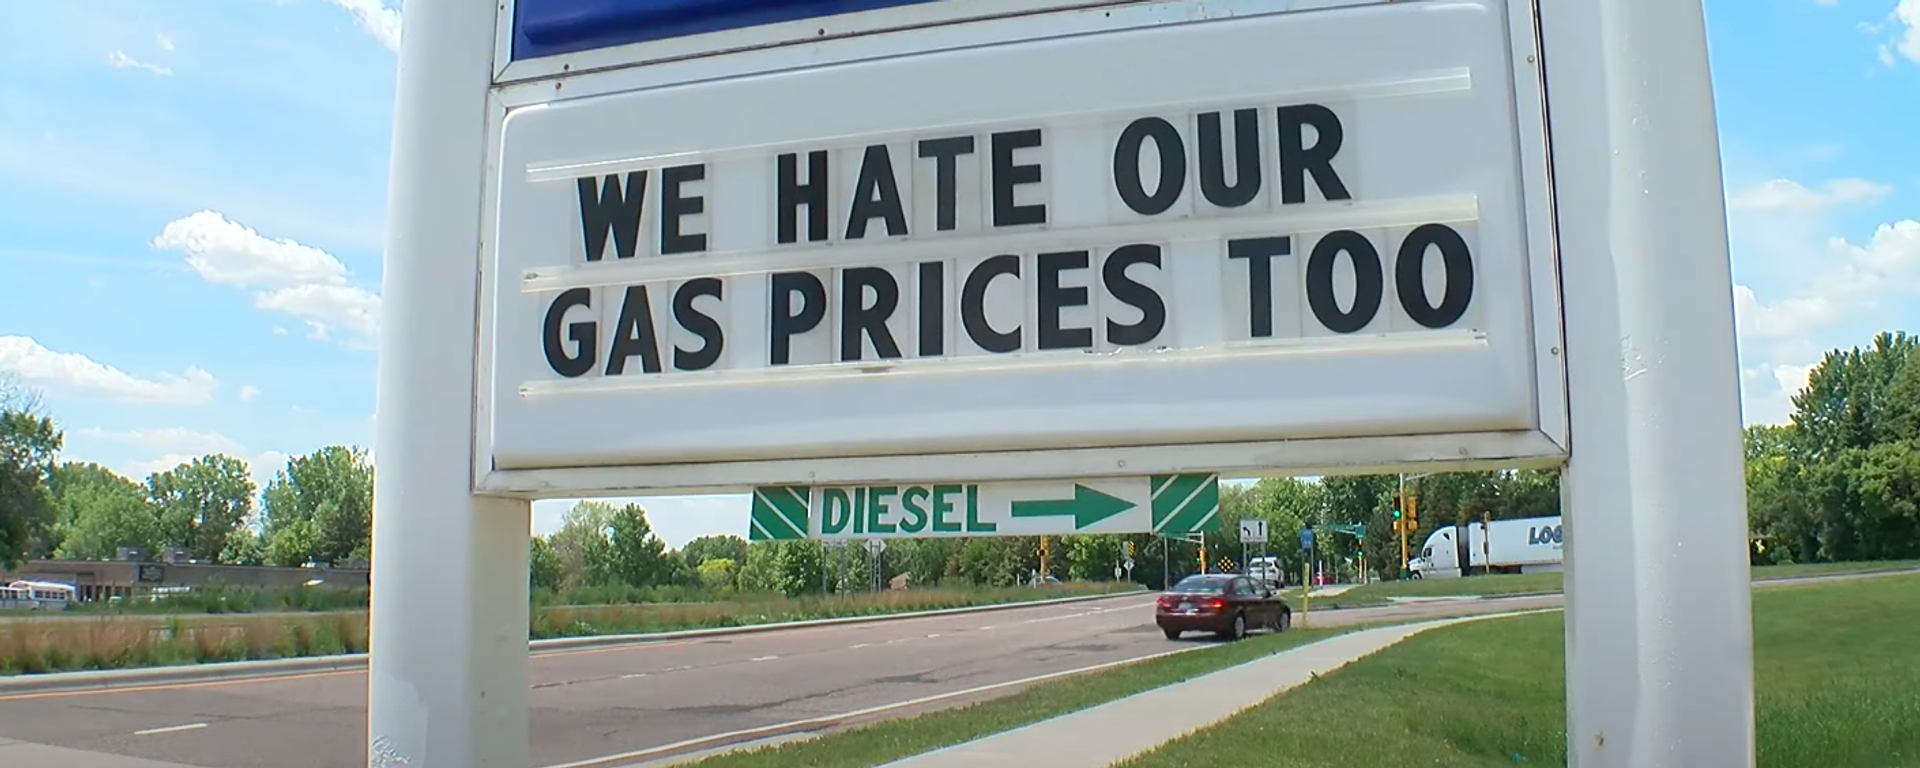 Gas station sign in Minnesota expressing sympathy for its customers as US national average gas prices top $5 bucks a gallon. Screengrab of WCCO - CBS Minnesota report. - Sputnik International, 1920, 25.06.2022